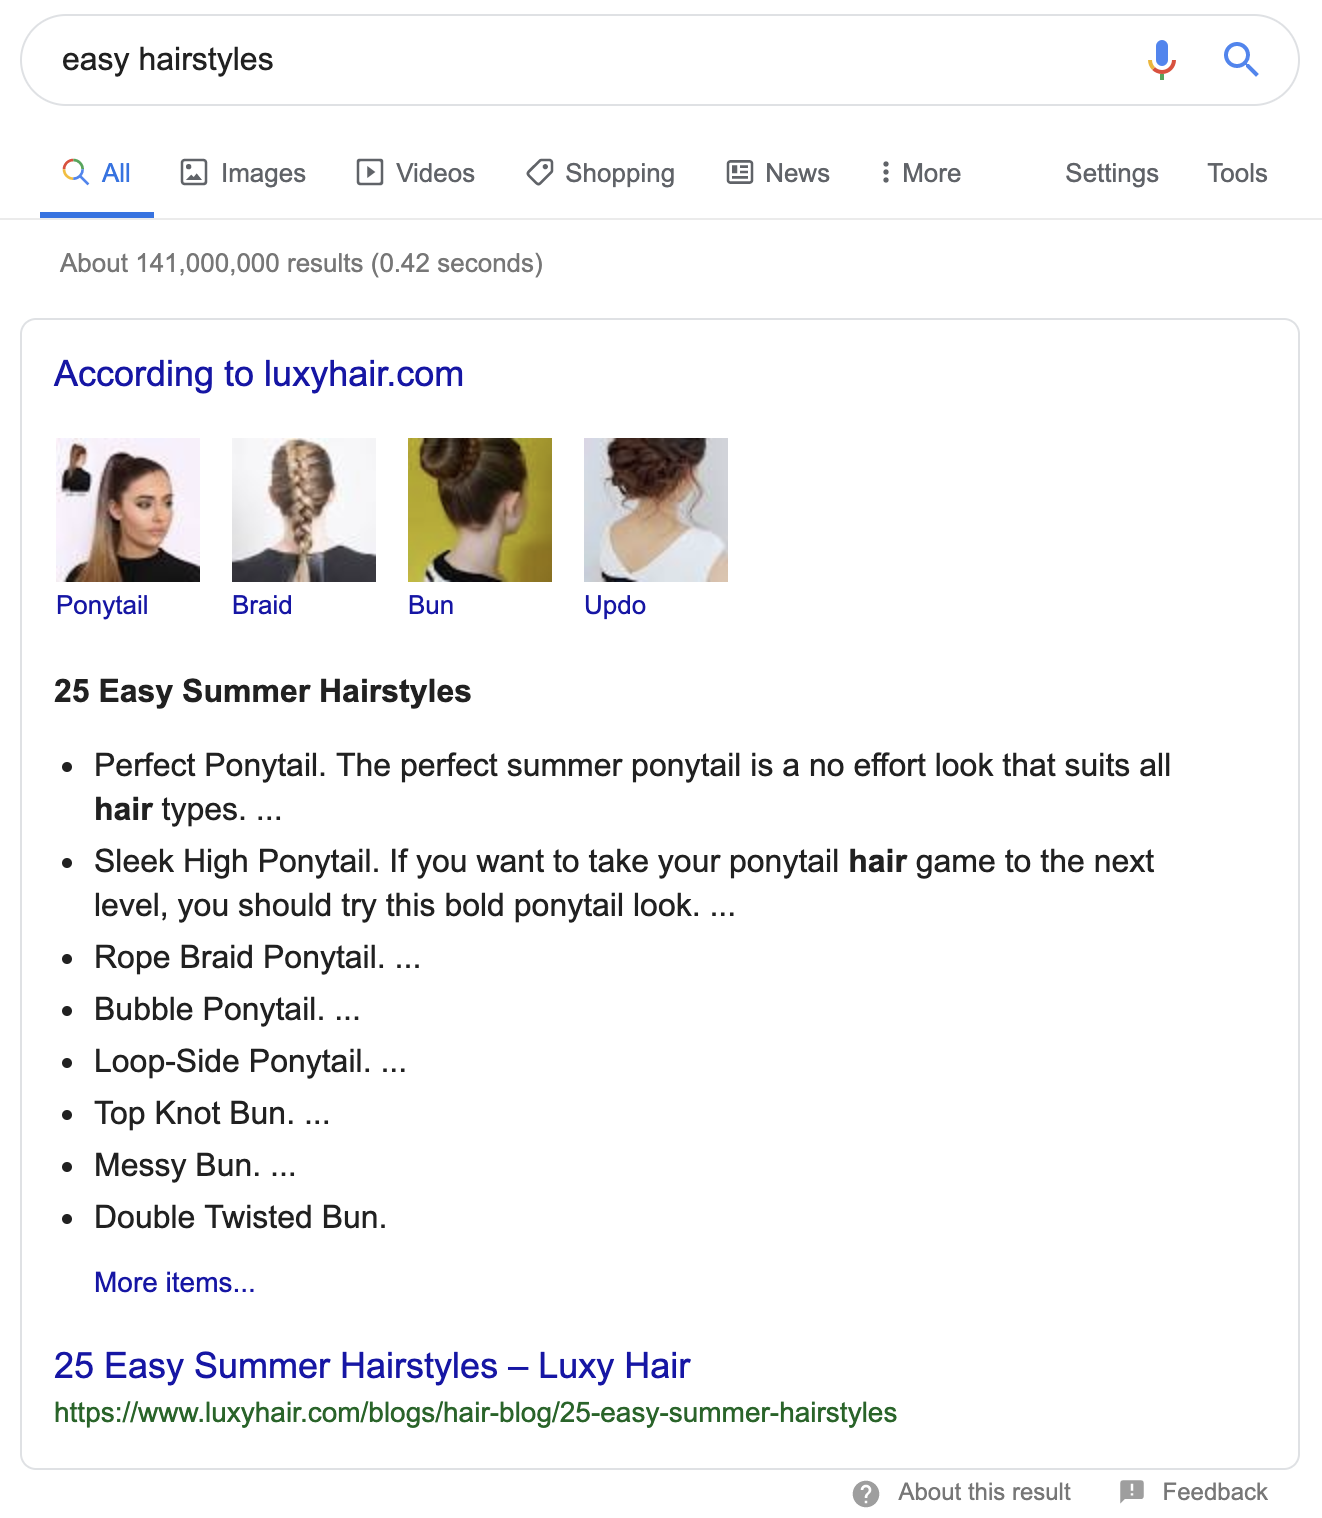 Screenshot of Luxy Hair featured snippets on Google